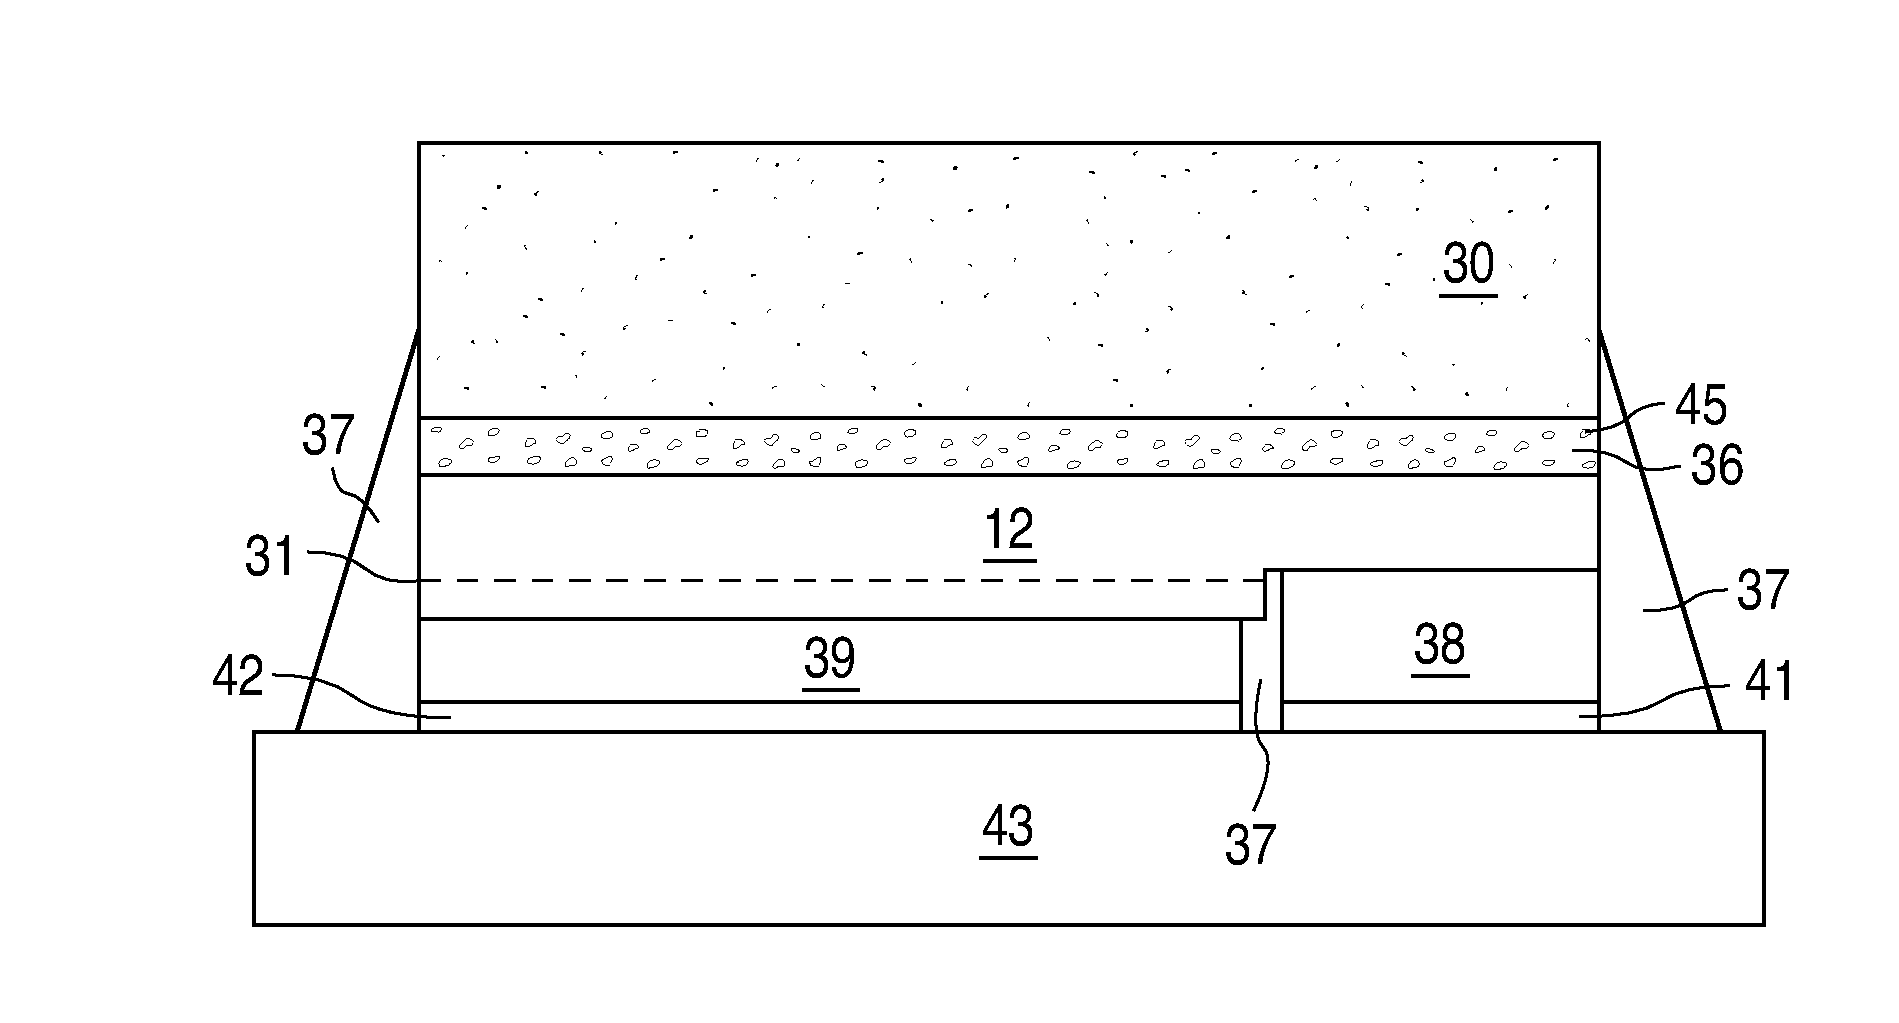 Light Emitting Device Including Luminescent Ceramic and Light-Scattering Material